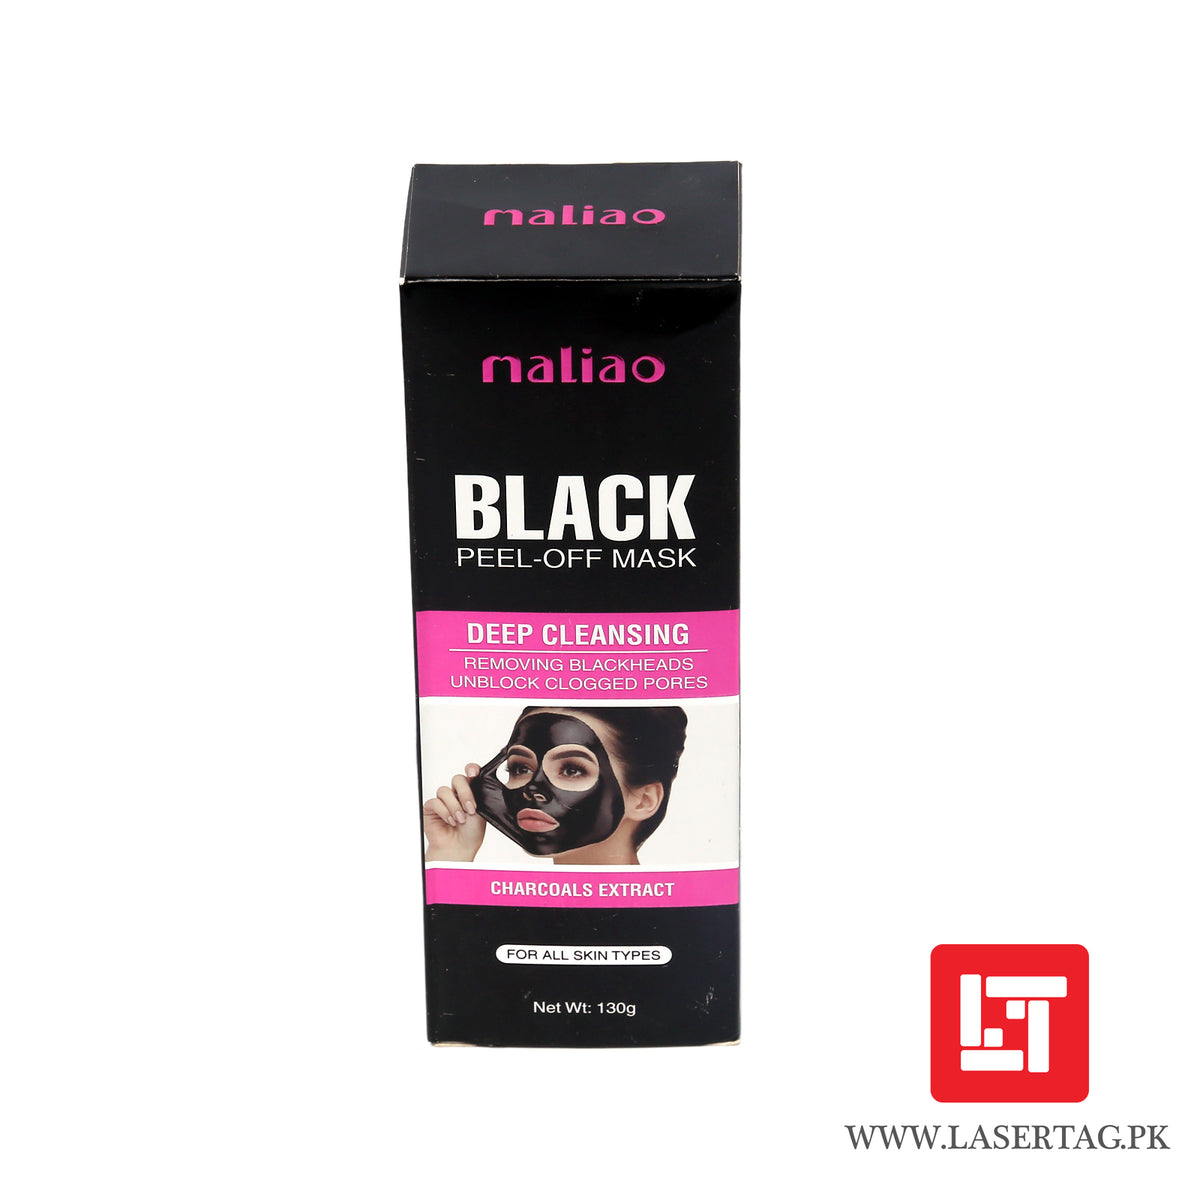 Maliao Black Peel Off Mask Deep Cleansing Removing Blackheads Unblock Clogged Pores M134 130g freeshipping - lasertag.pk